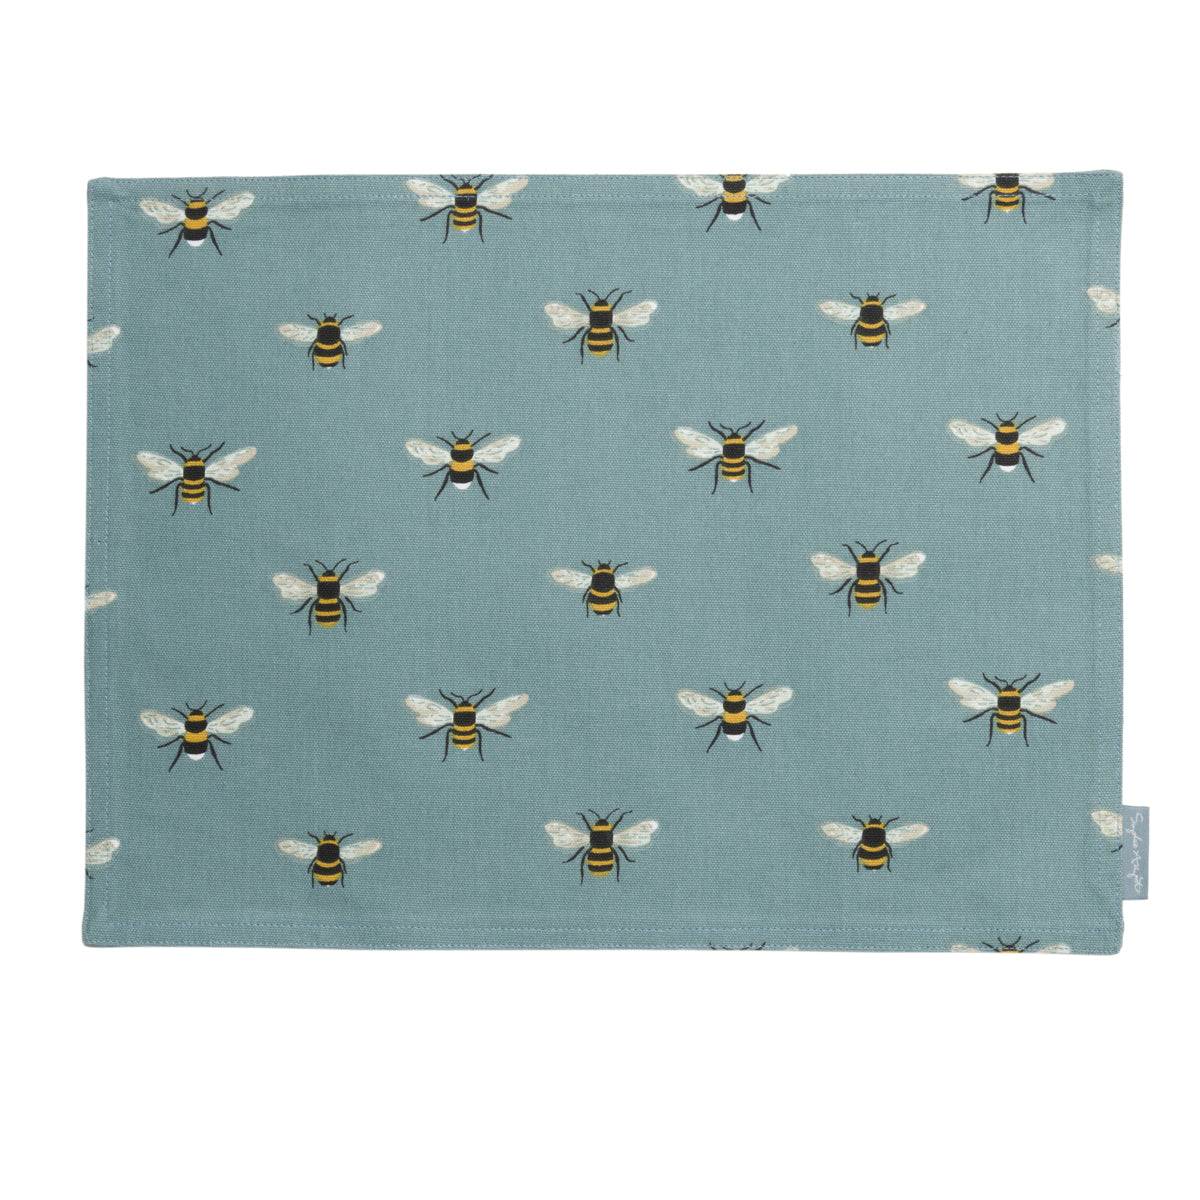 Bees Teal Fabric Placemat by Sophie Allport